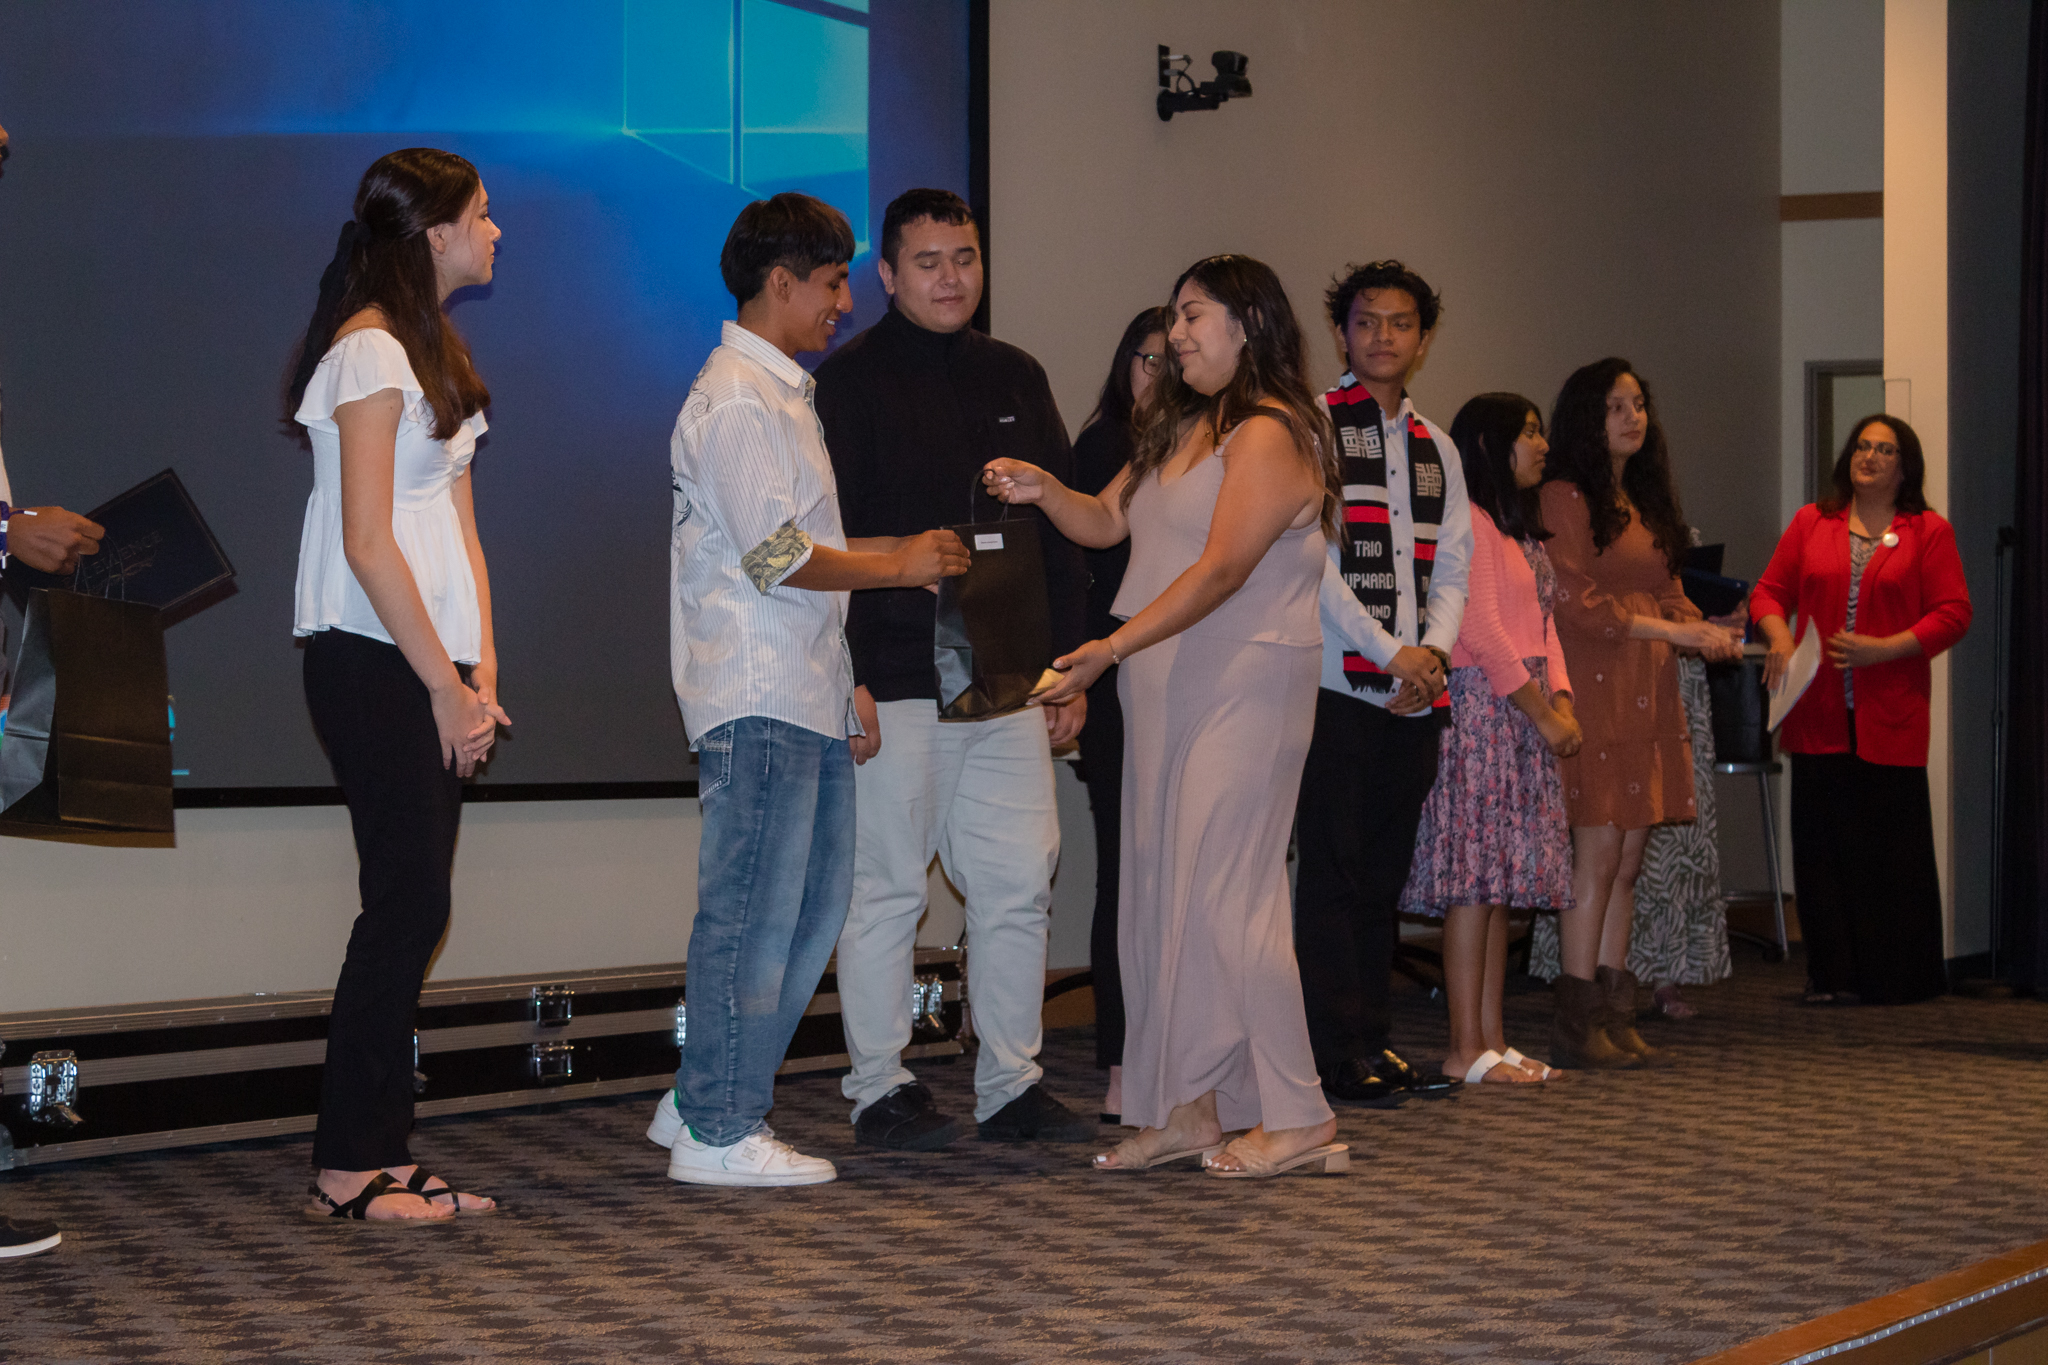 trio staff hand out awards to group of students on stage